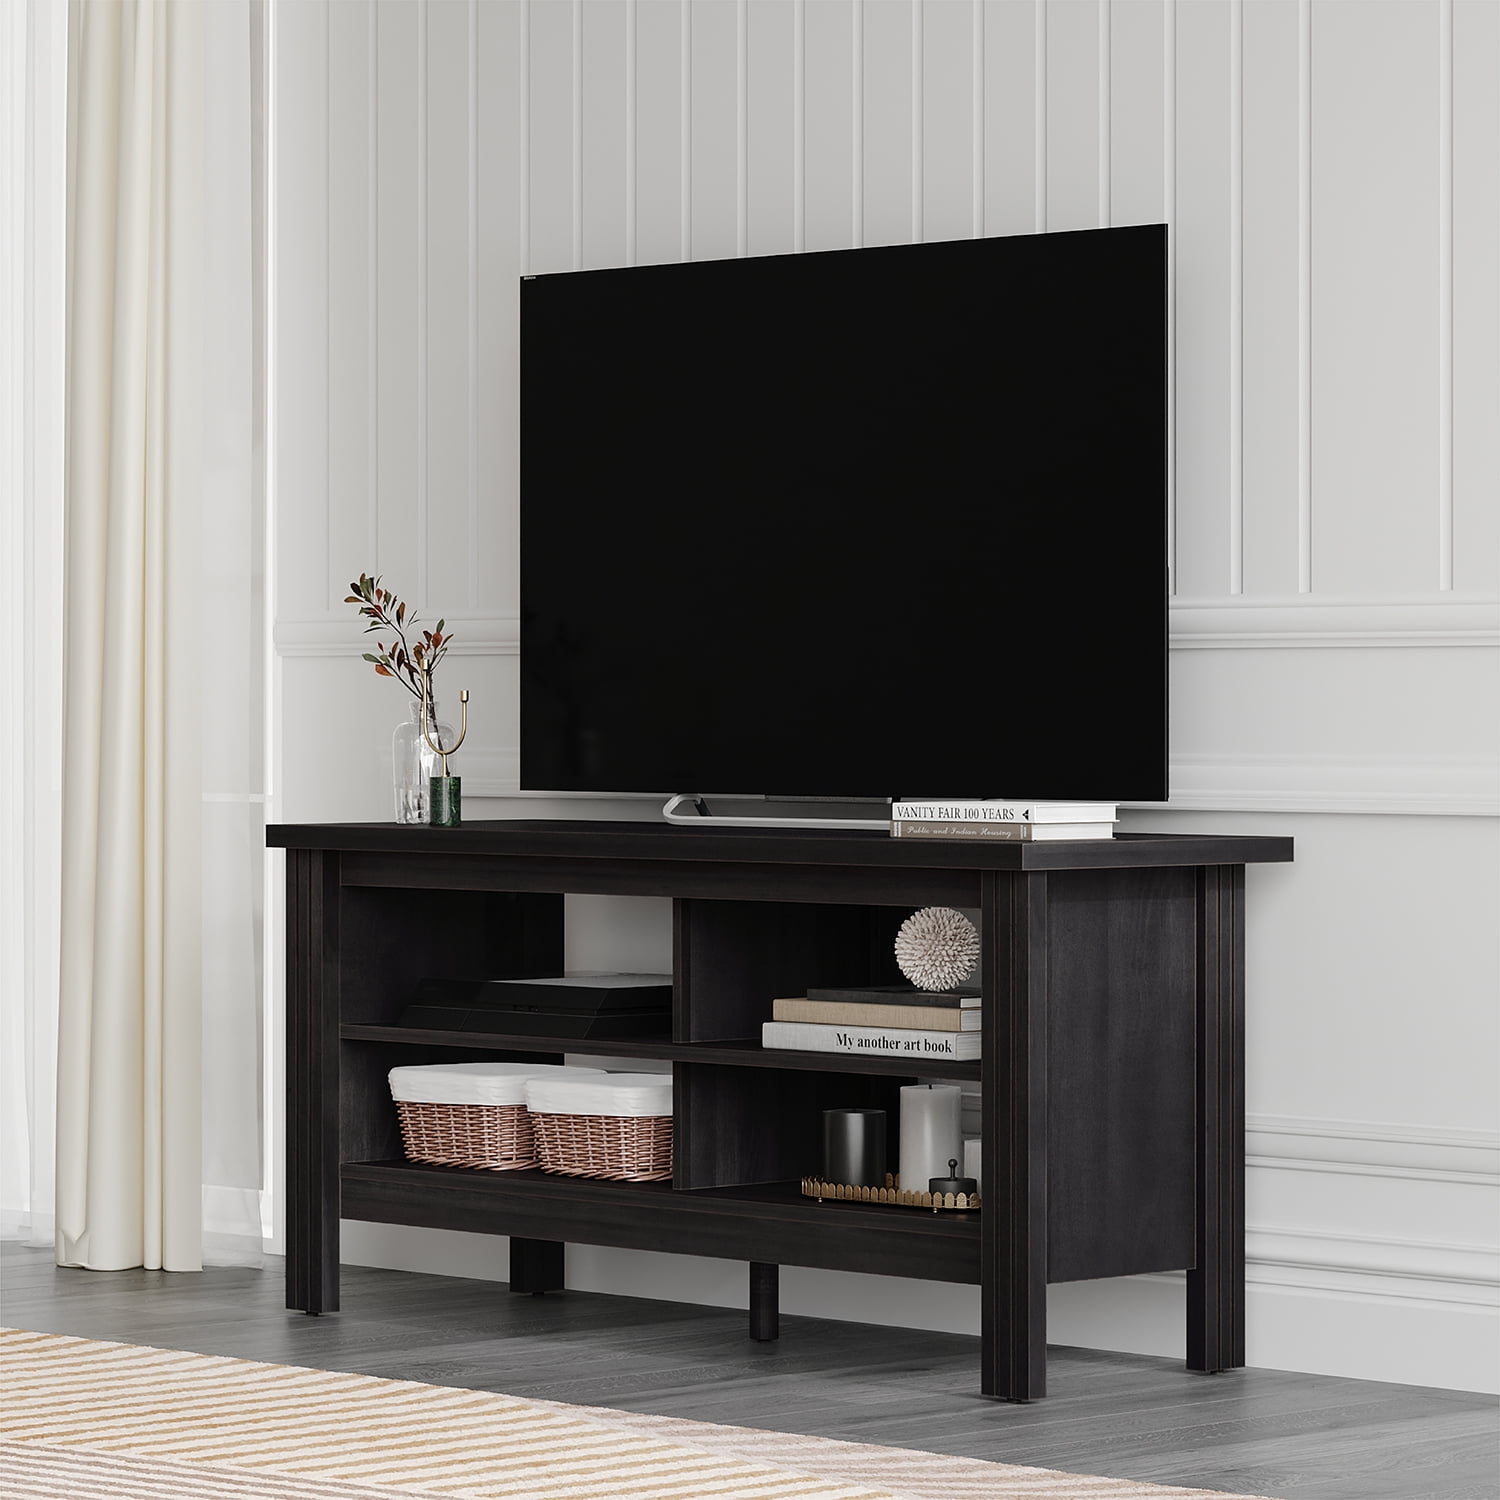 3-Cube TV Stand Entertainment Center Organizer Fits 40" LCD White Open Shelf New 